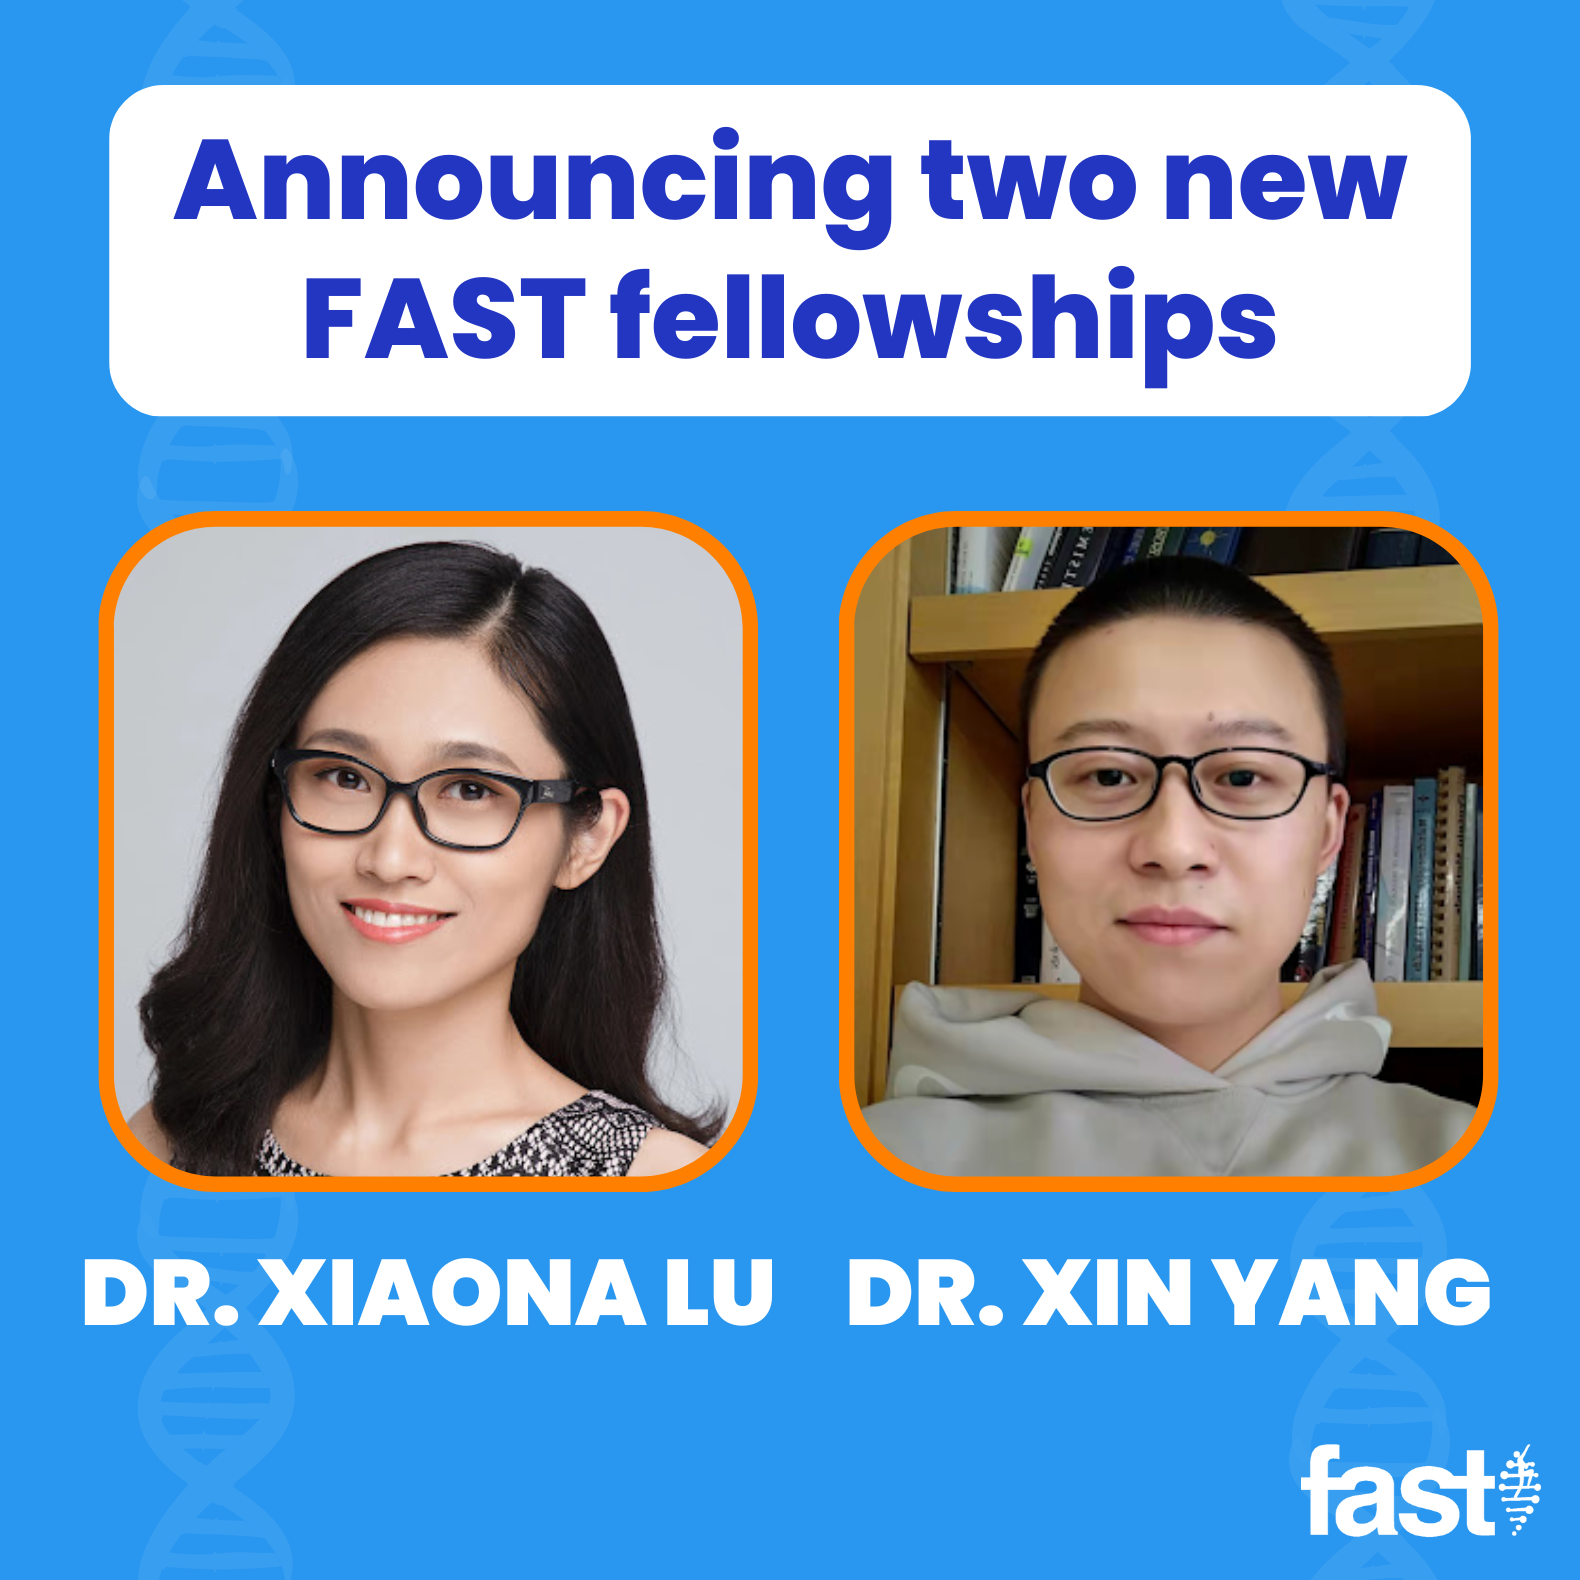 Announcing two new FAST fellowships: Dr. Xiaona Lu and Dr. Xin Yang, with photos of Dr. Lu and Dr. Yang